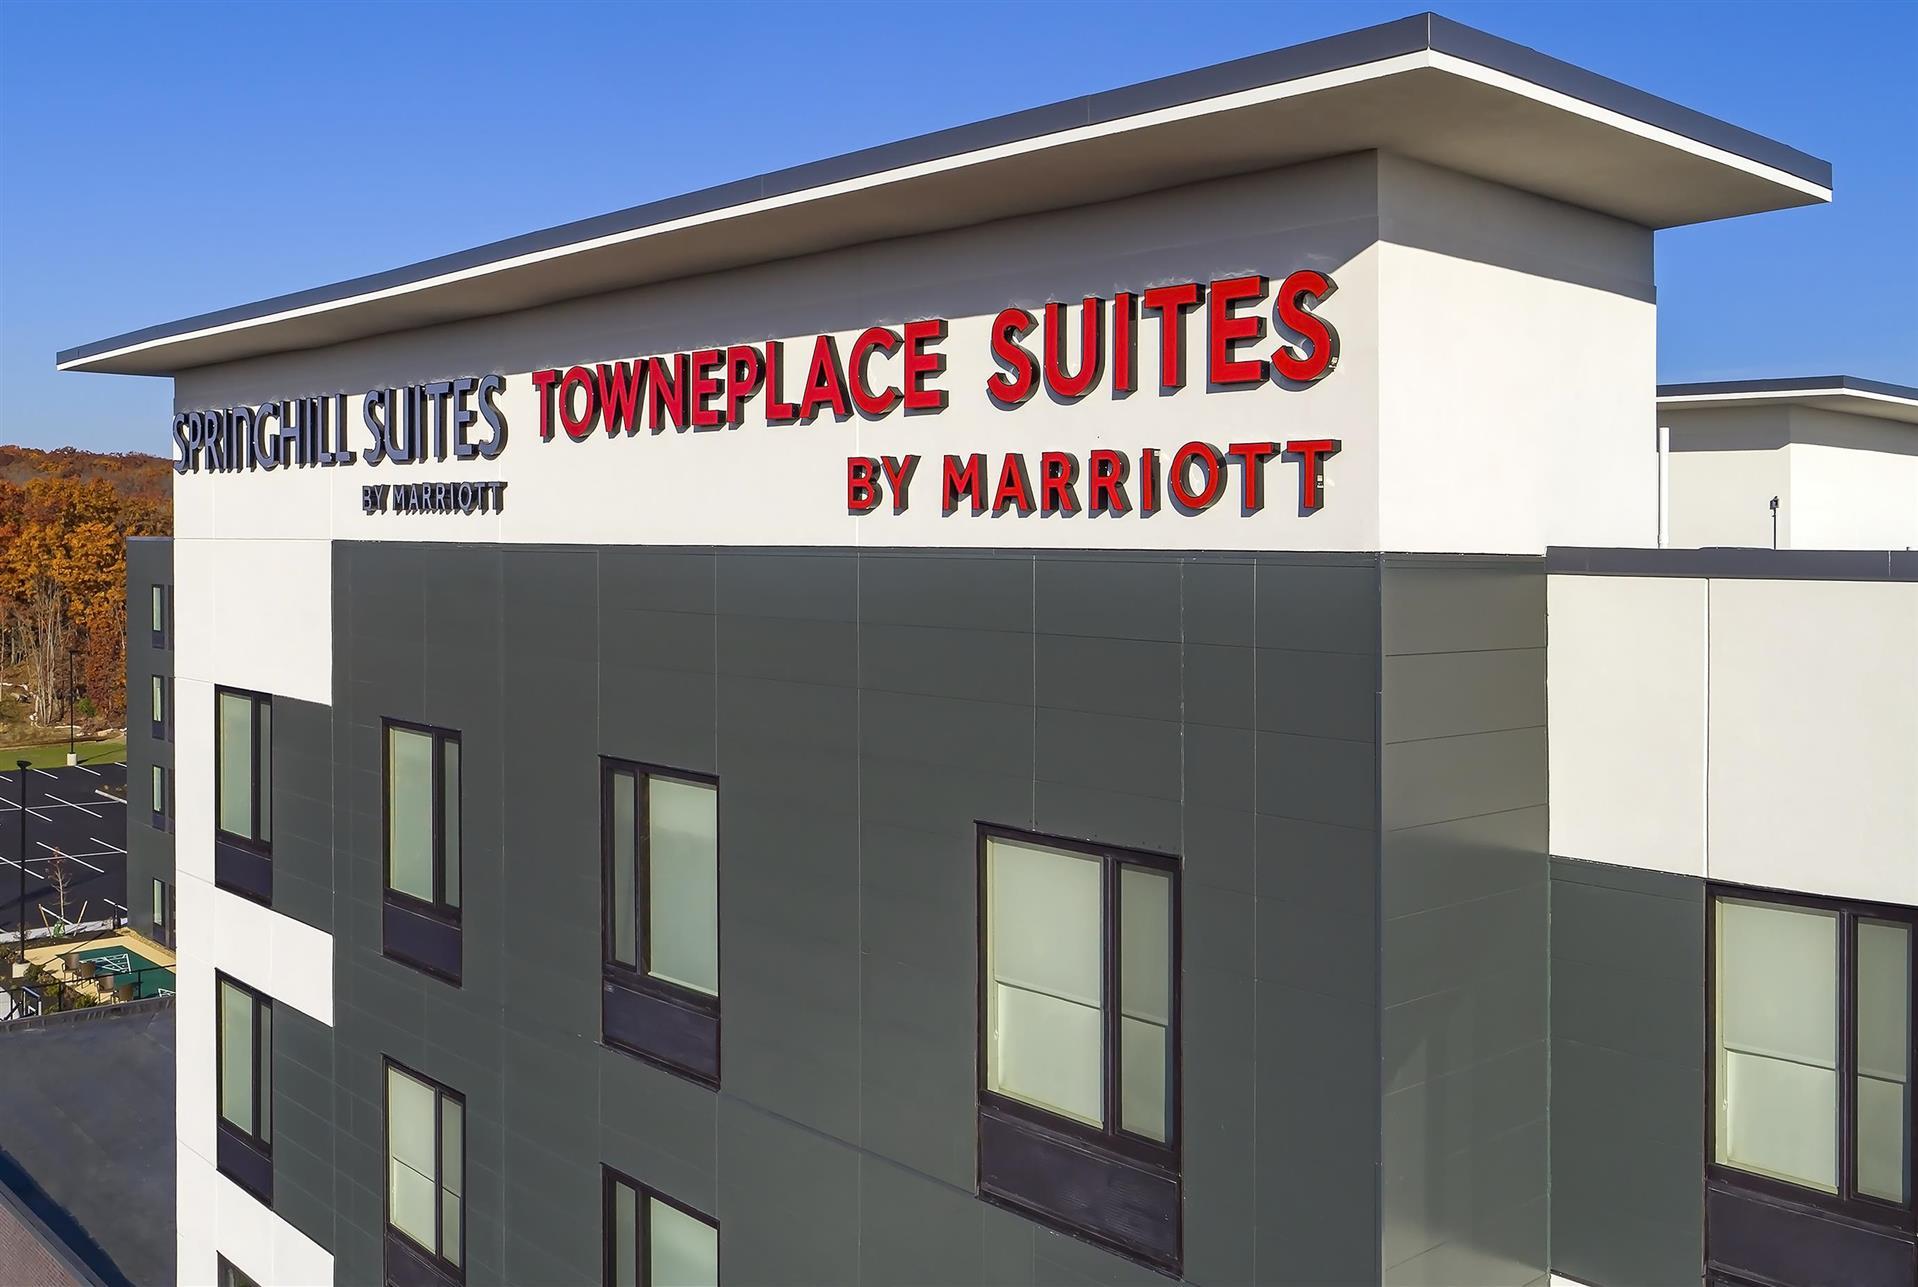 TownePlace Suites Wrentham Plainville in Wrentham, MA